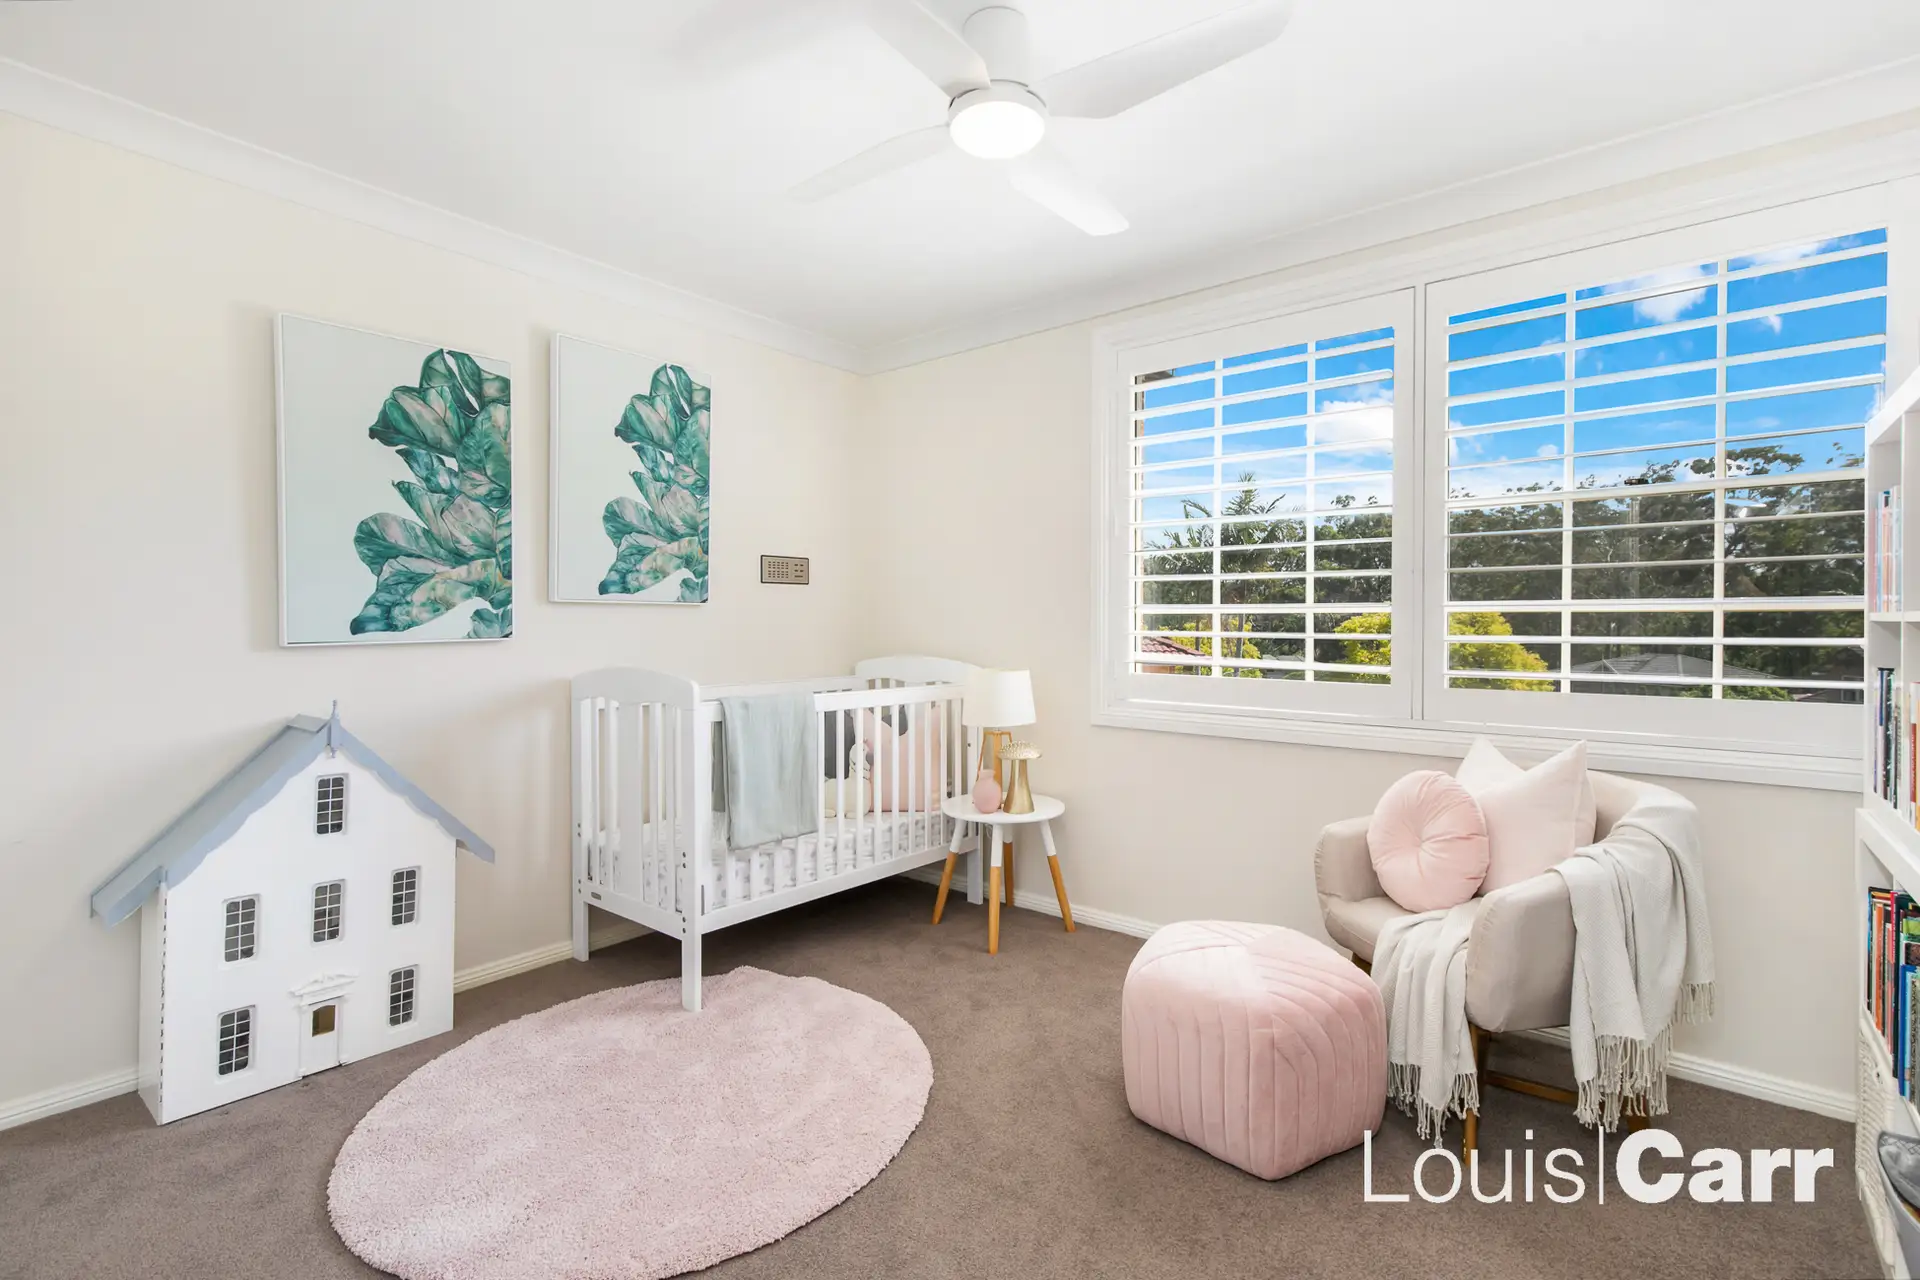 Photo #13: 12 Chiswick Place, Cherrybrook - Sold by Louis Carr Real Estate